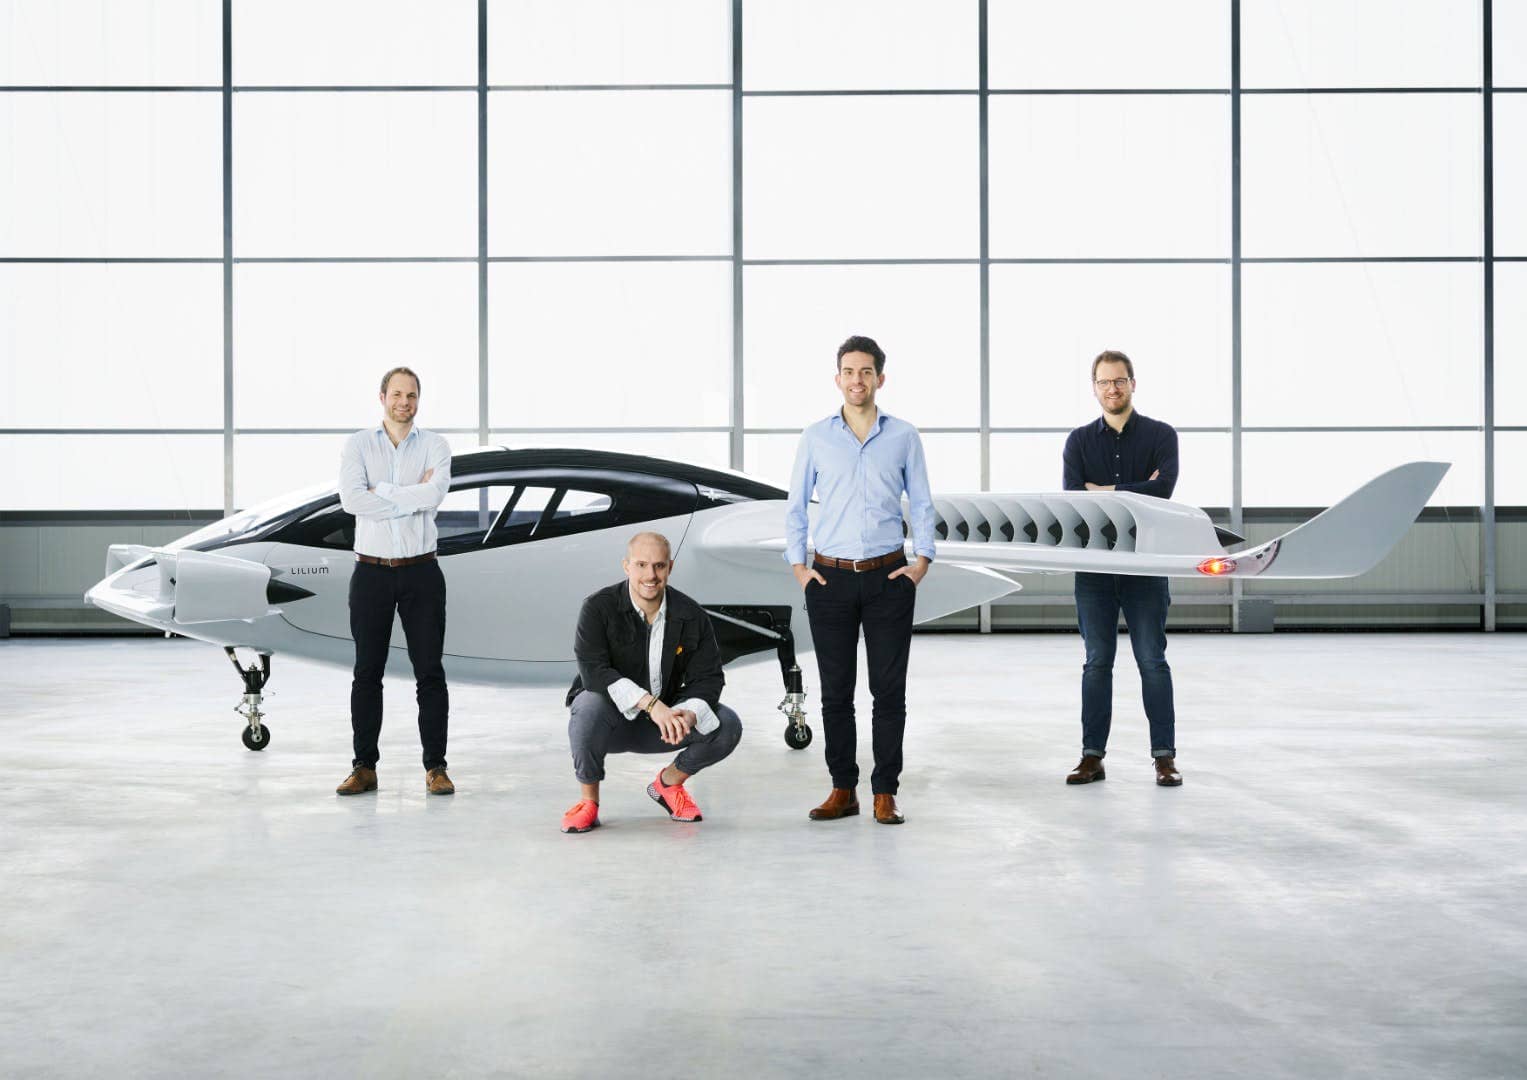 The Full-Size Electric Jet By German Startup Lilium Takes Flight!